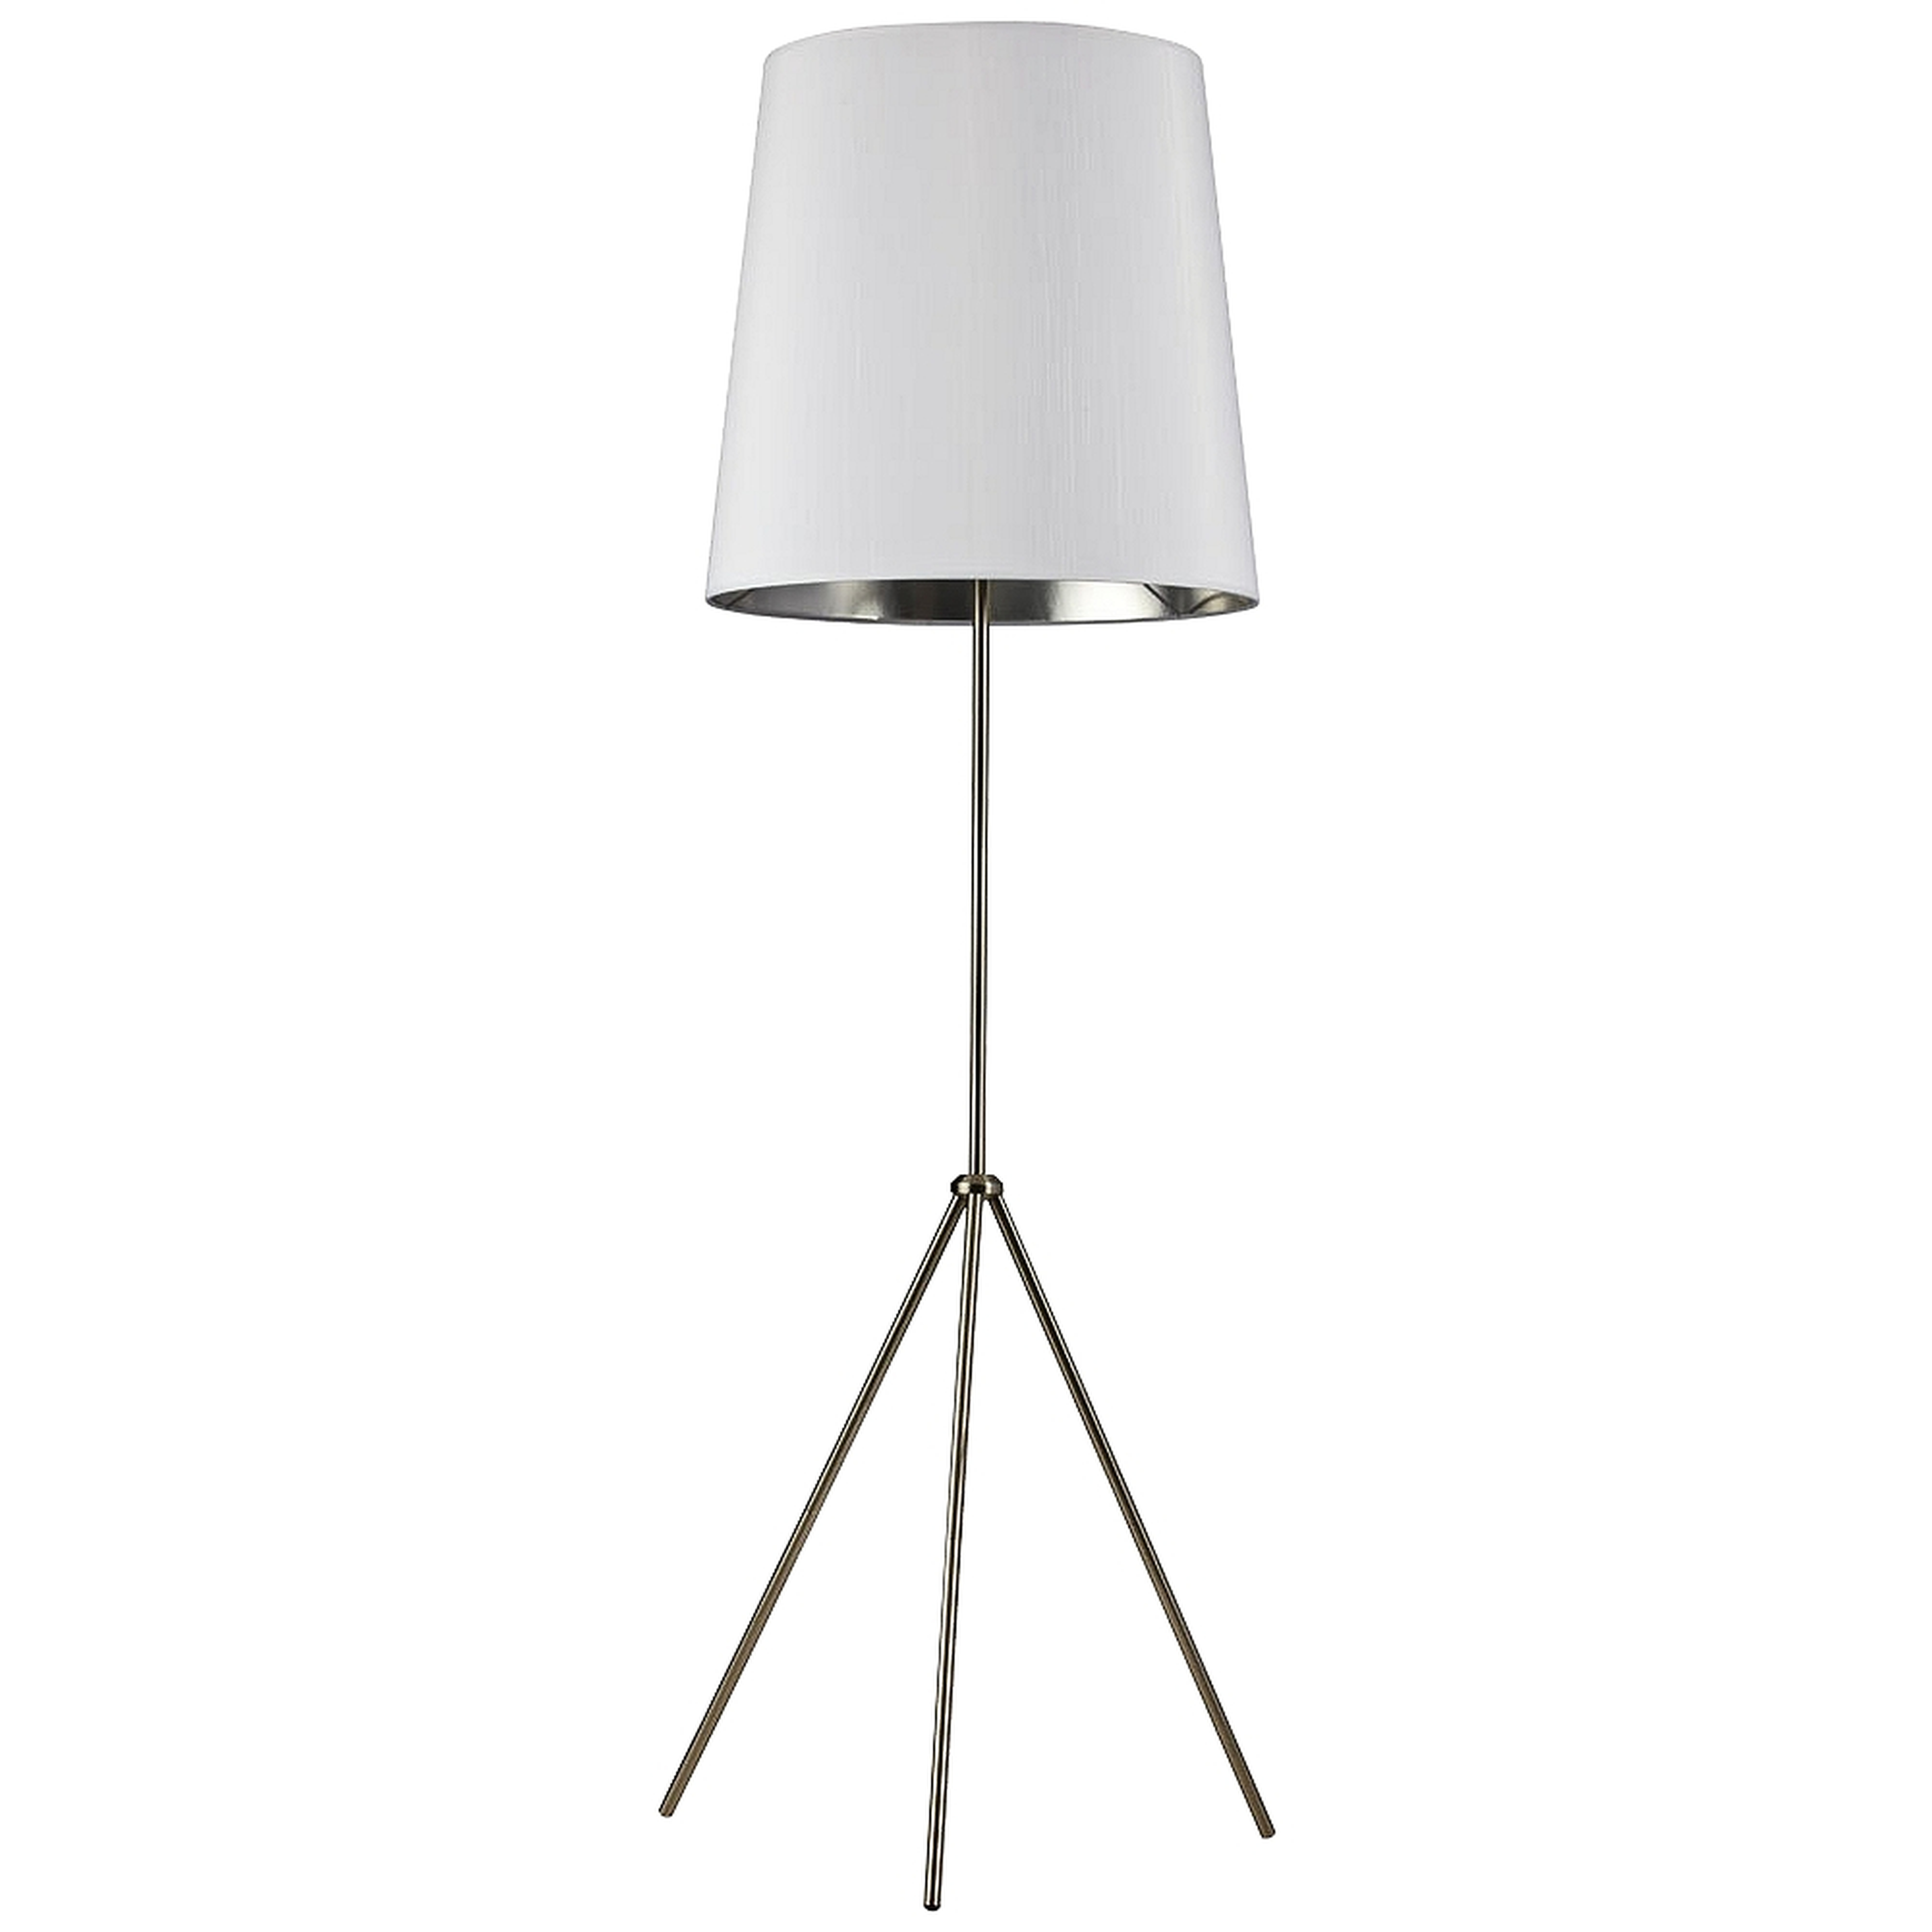 Finesse Satin Chrome Floor Lamp with Small White-Silver Shade - Style # 60G80 - Lamps Plus